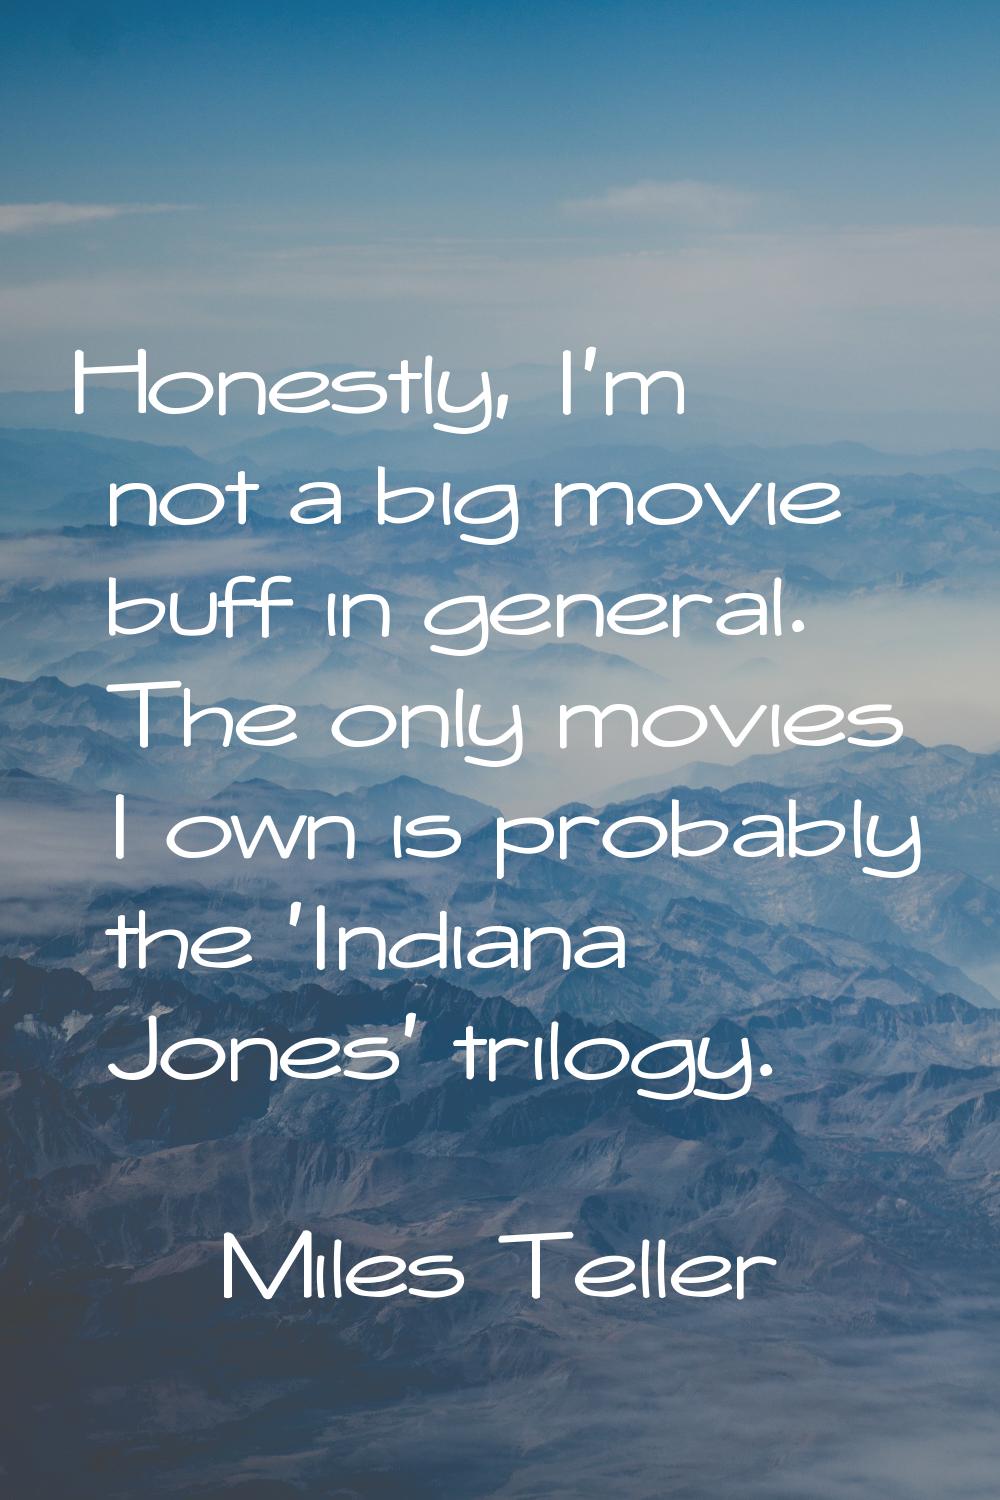 Honestly, I'm not a big movie buff in general. The only movies I own is probably the 'Indiana Jones